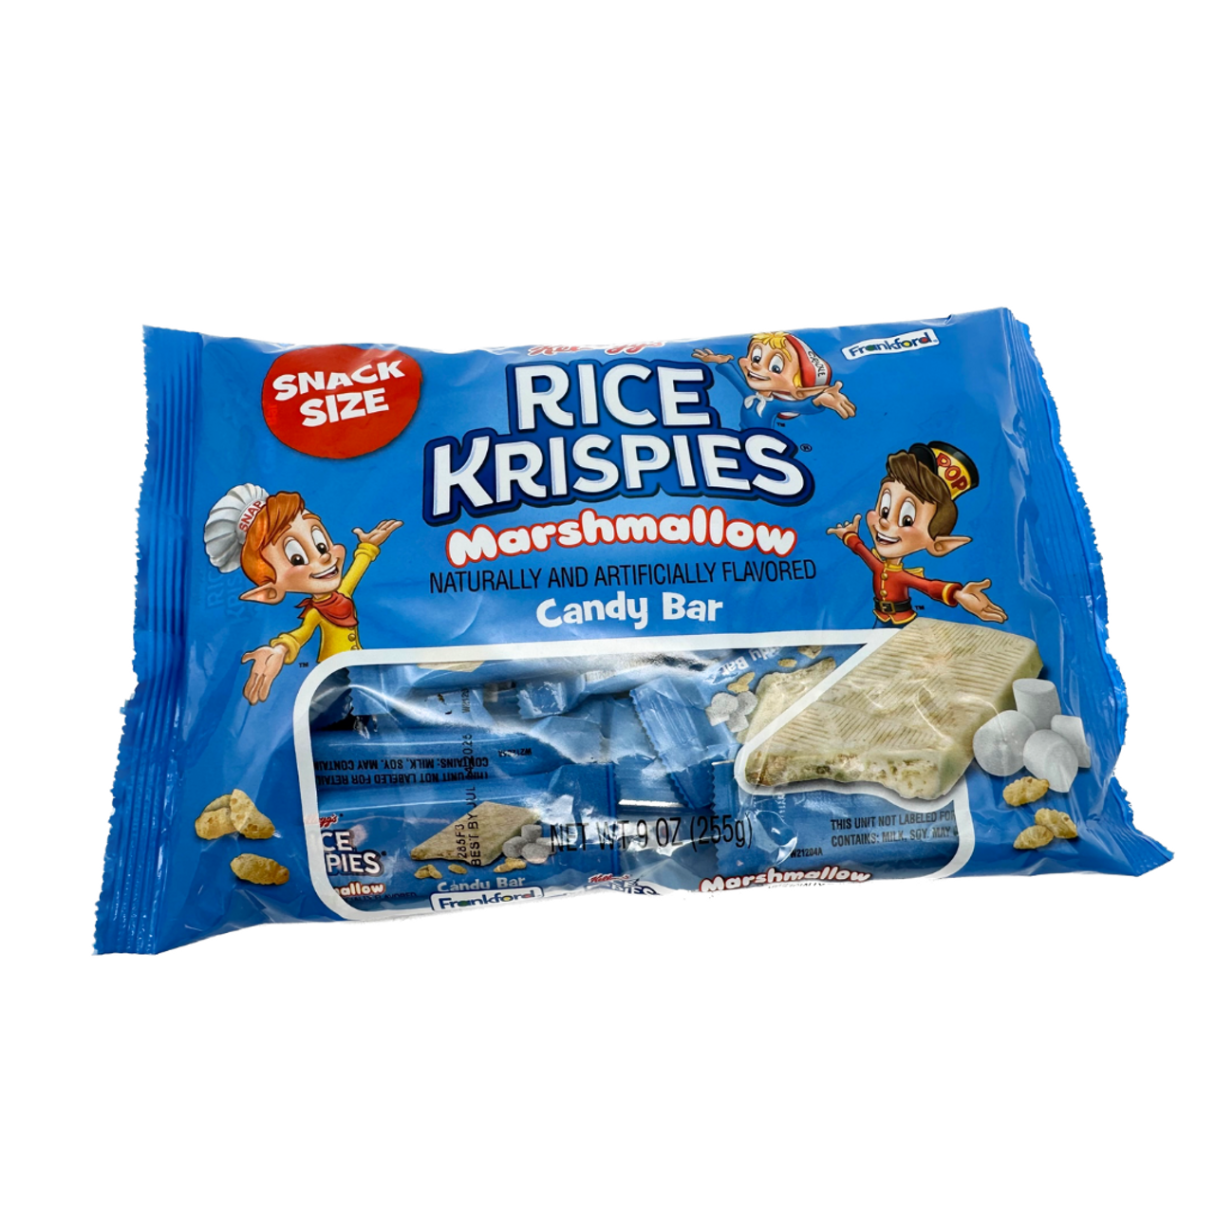 Frankford Rice Krispies Marshmallow Snack Size Candy Bars  9oz - 12ct